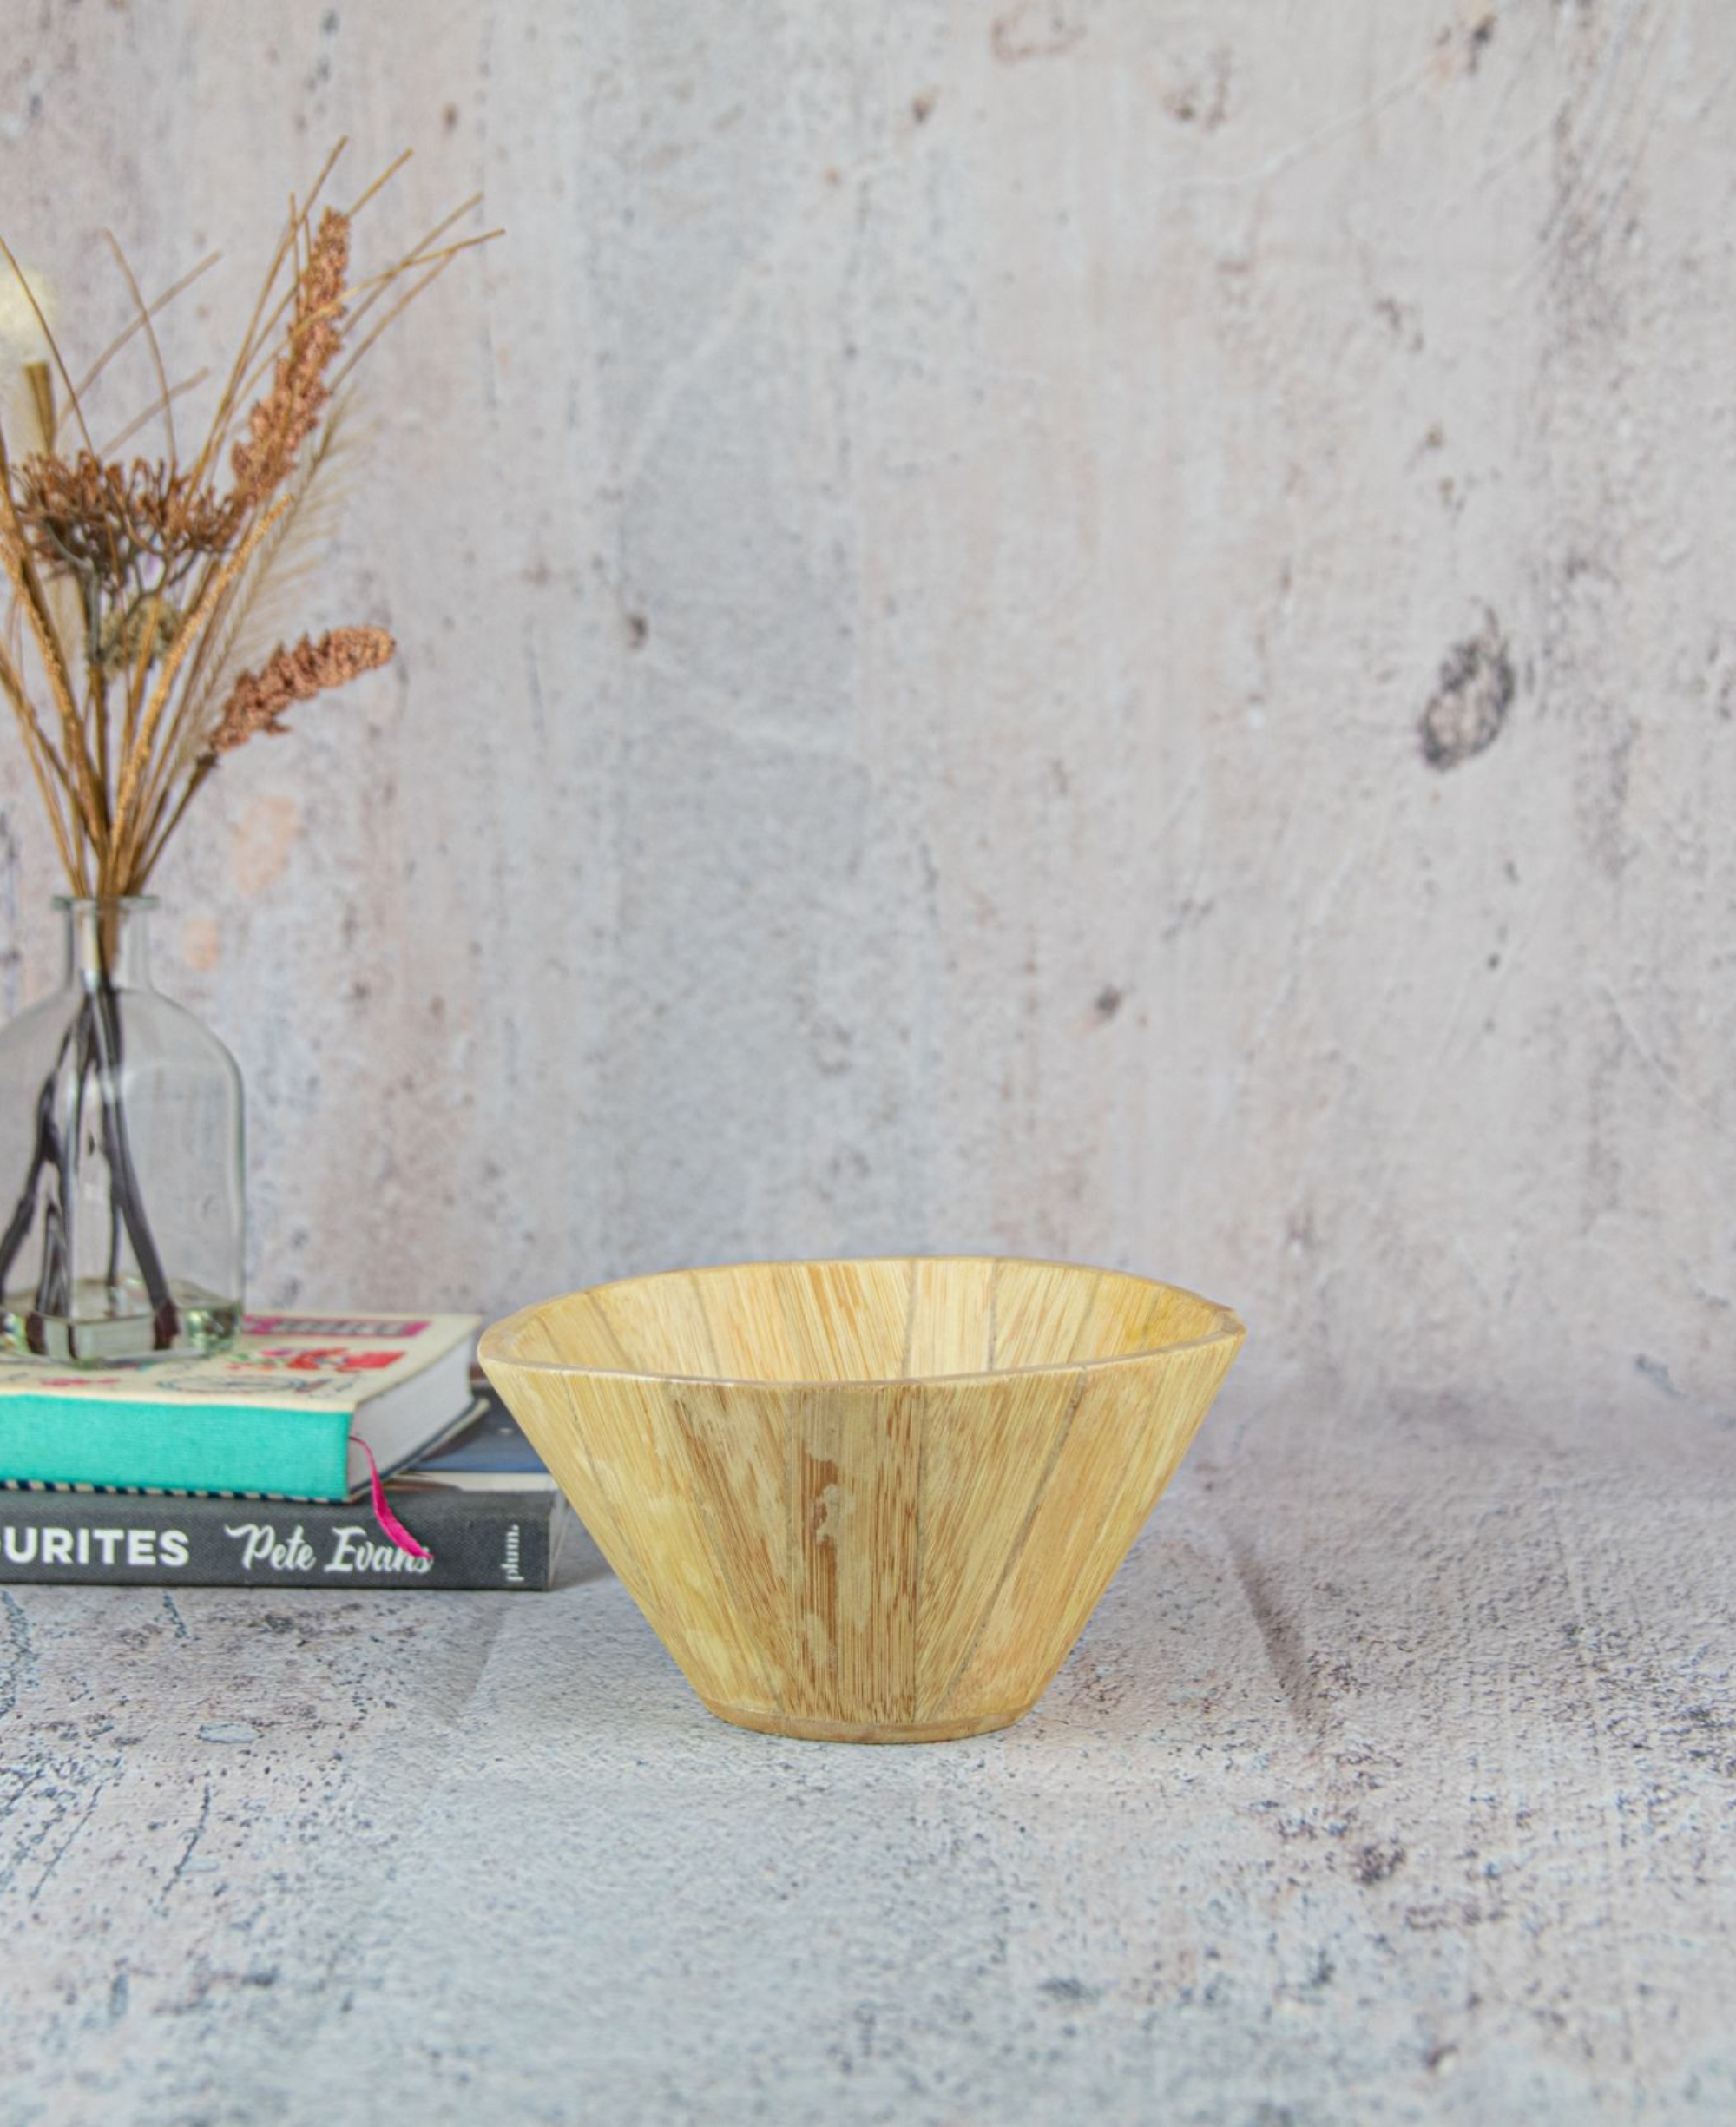 Handcrafted Palm Wood Bowls from Southern Morocco - Handmade Wood Bowl - Wooden bowls Decorative - Wood Bowl Gift